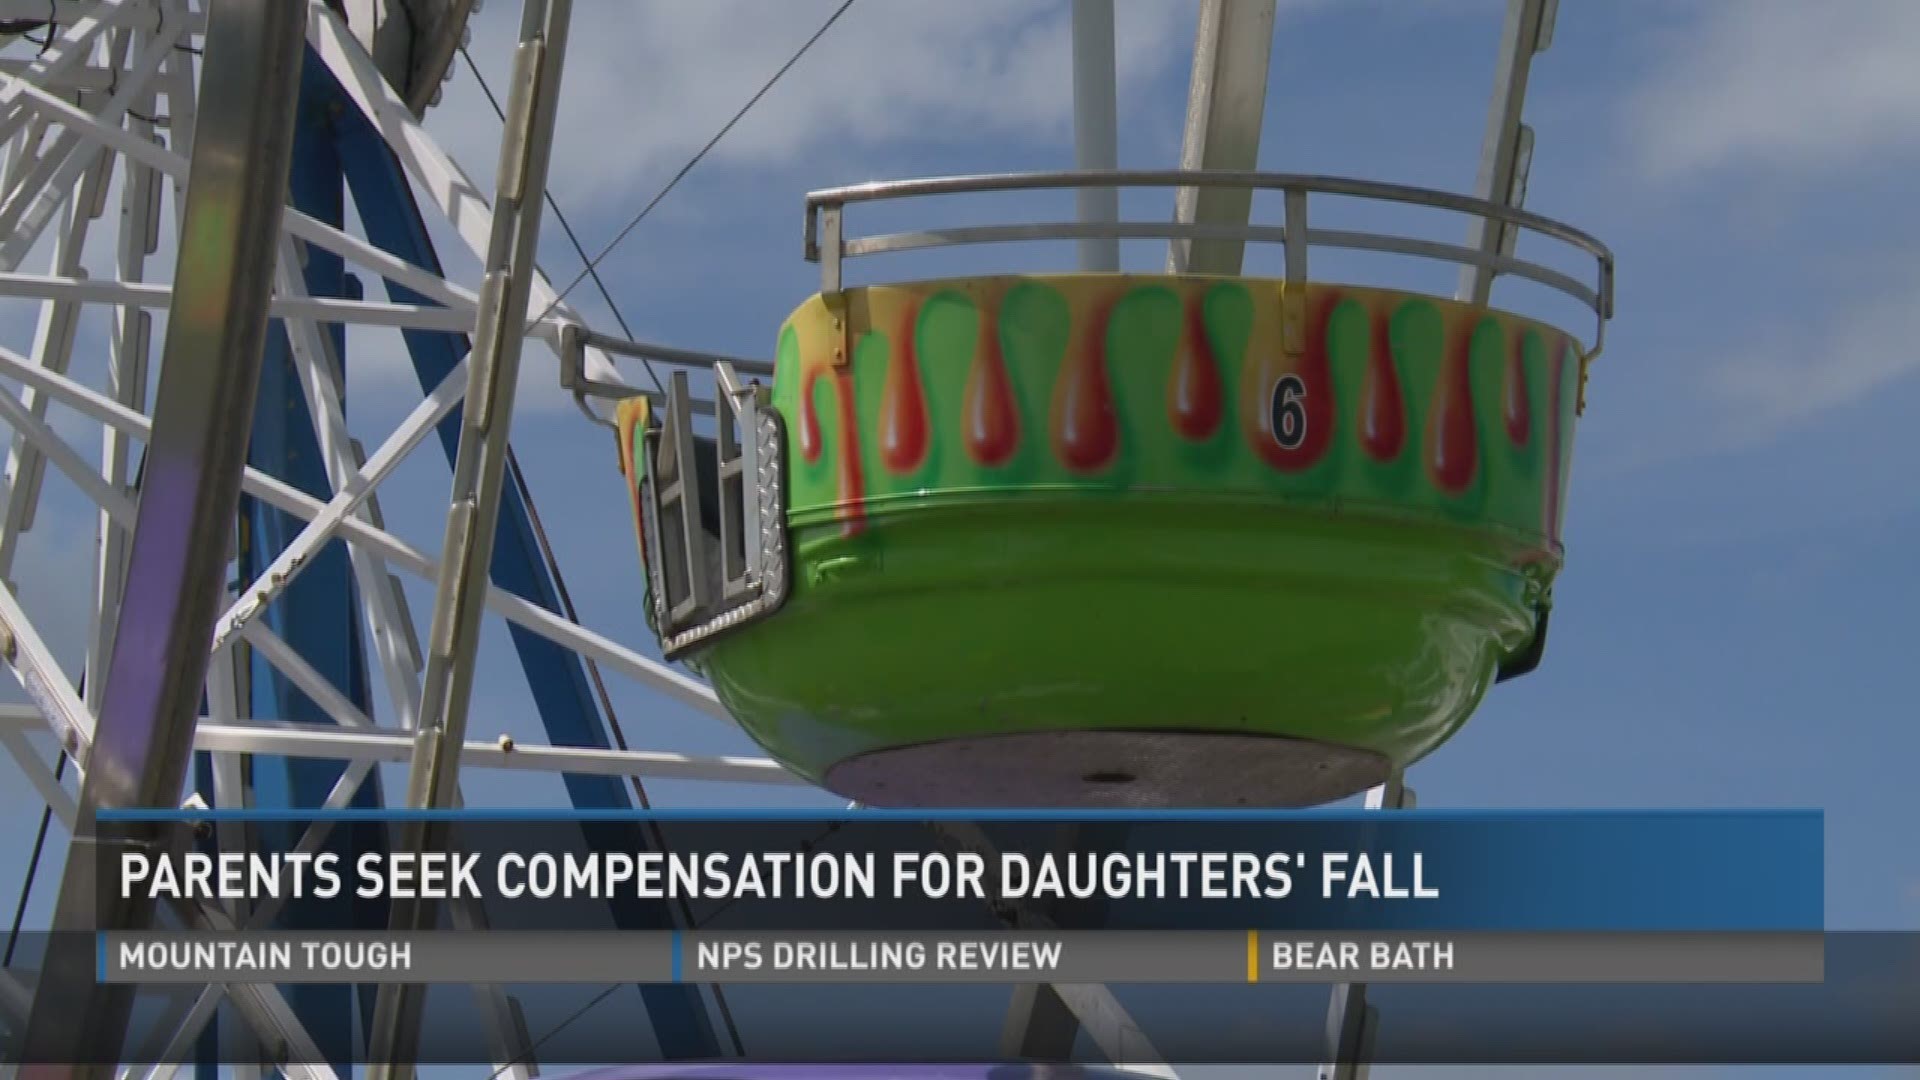 July 19, 2017: The parents of two girls who fell from a Ferris wheel at the Greene County Fair have filed a lawsuit against the ride operator.